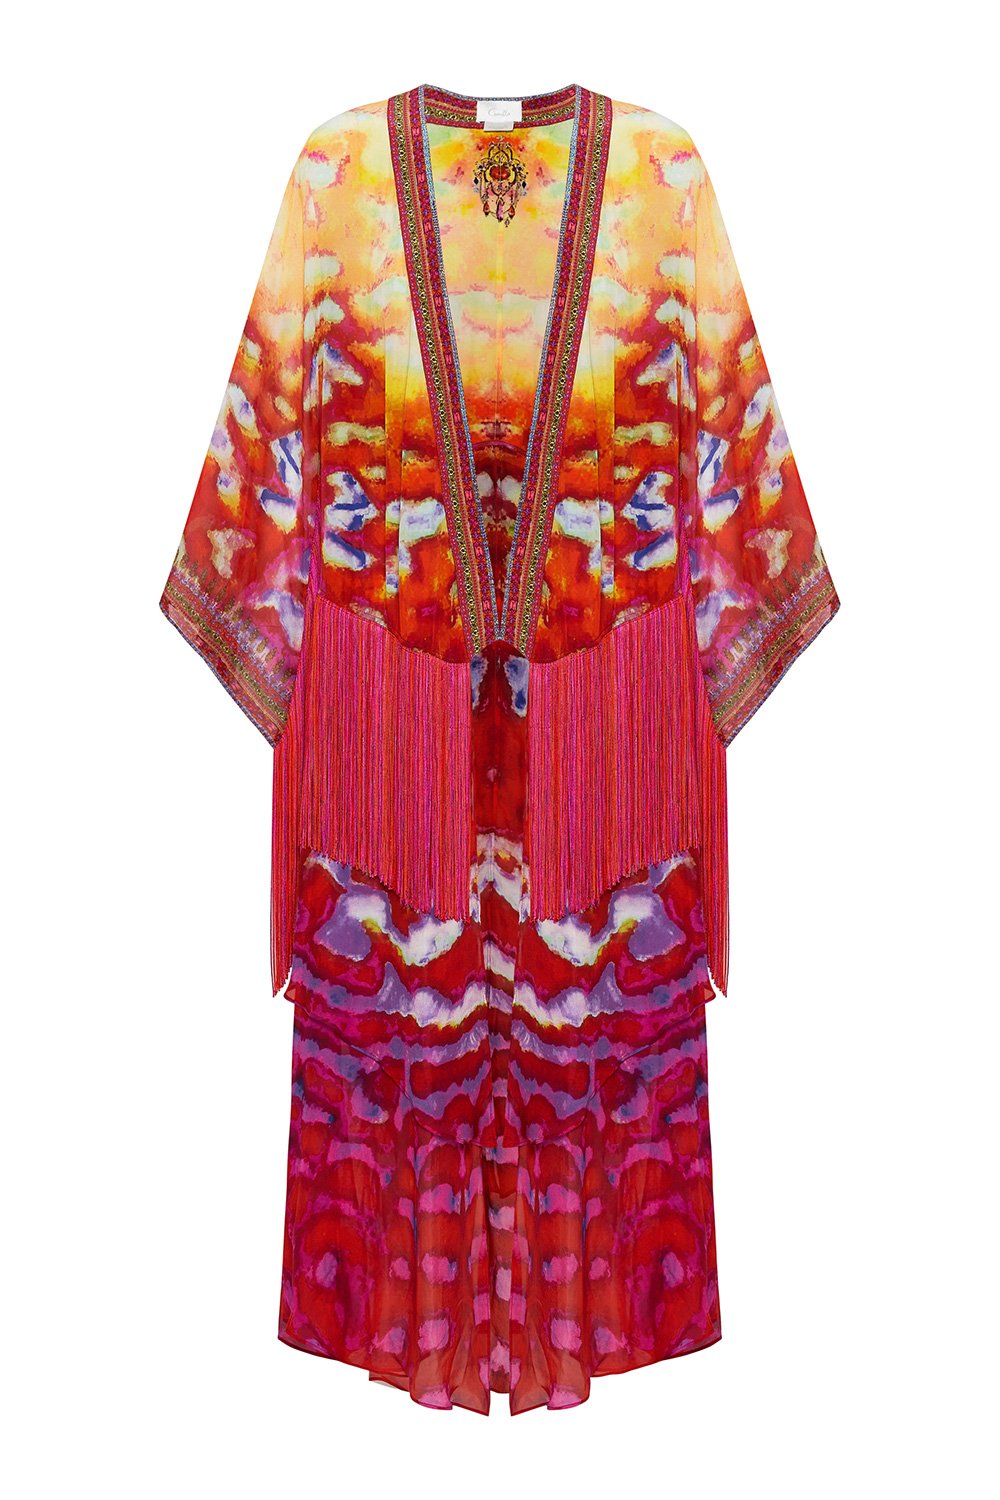 ROBE WITH DOUBLE LAYERED HEM BANSHEE BECKONS